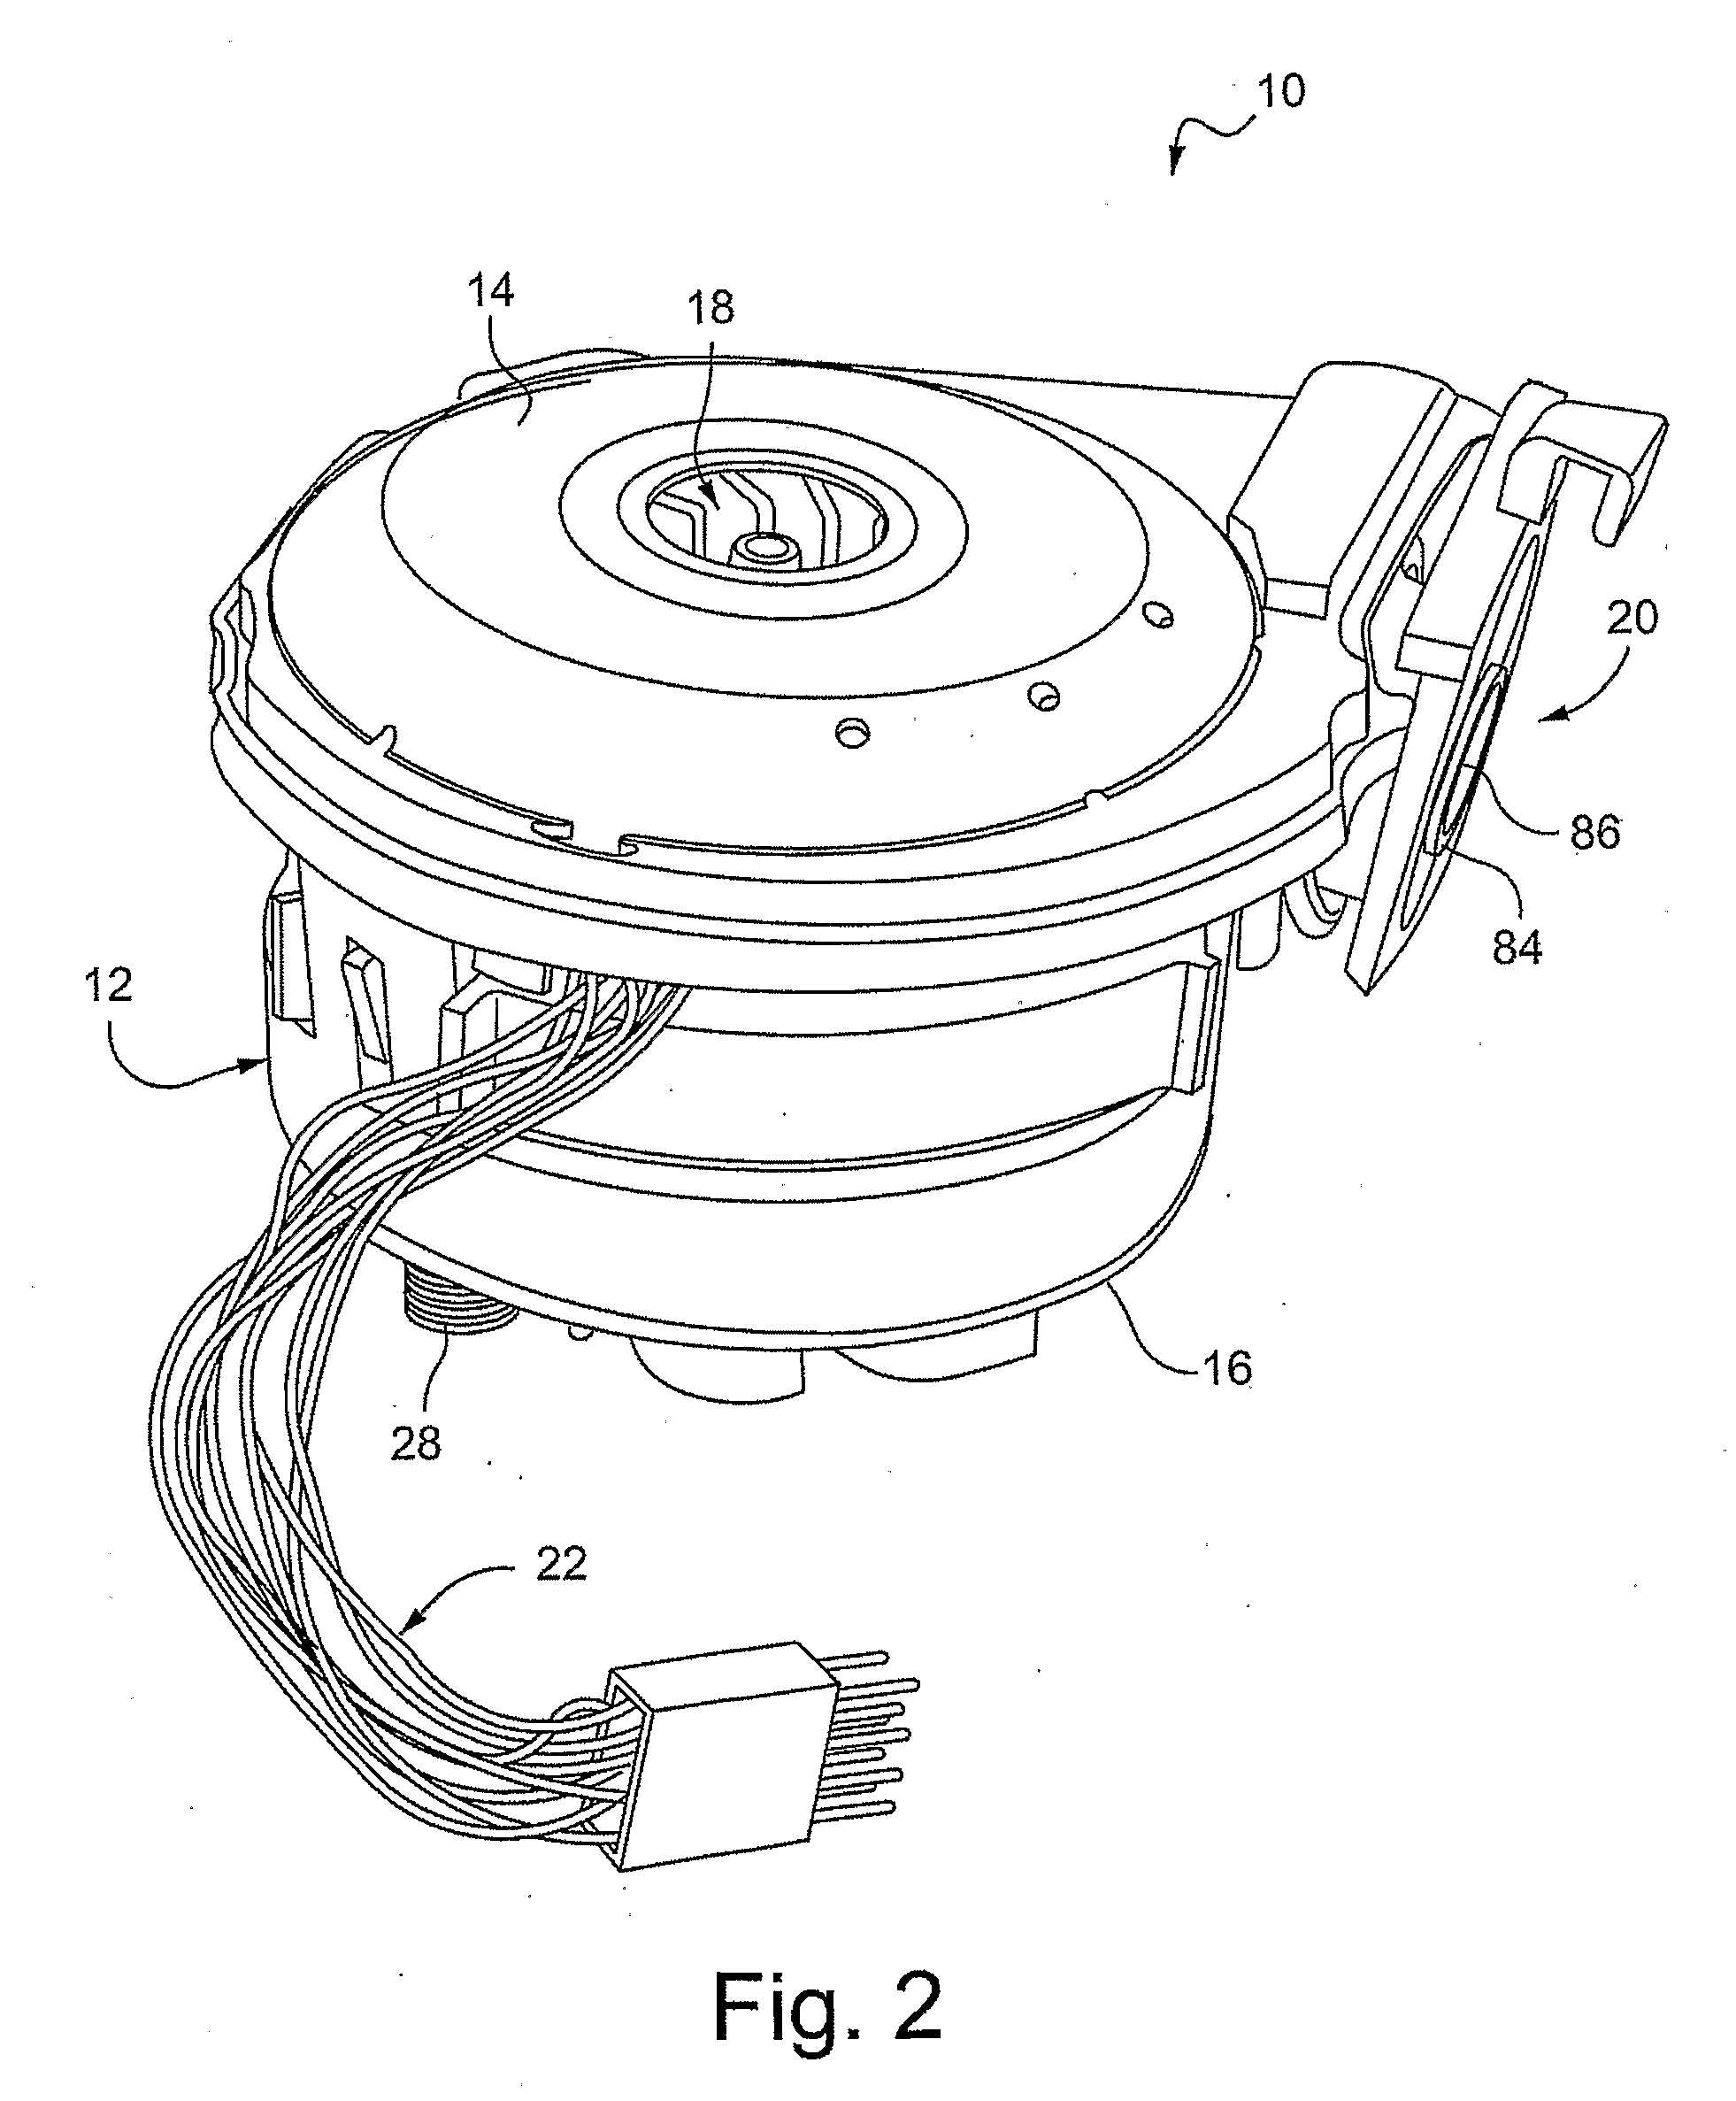 Blower Motor with Flexible Support Sleeve